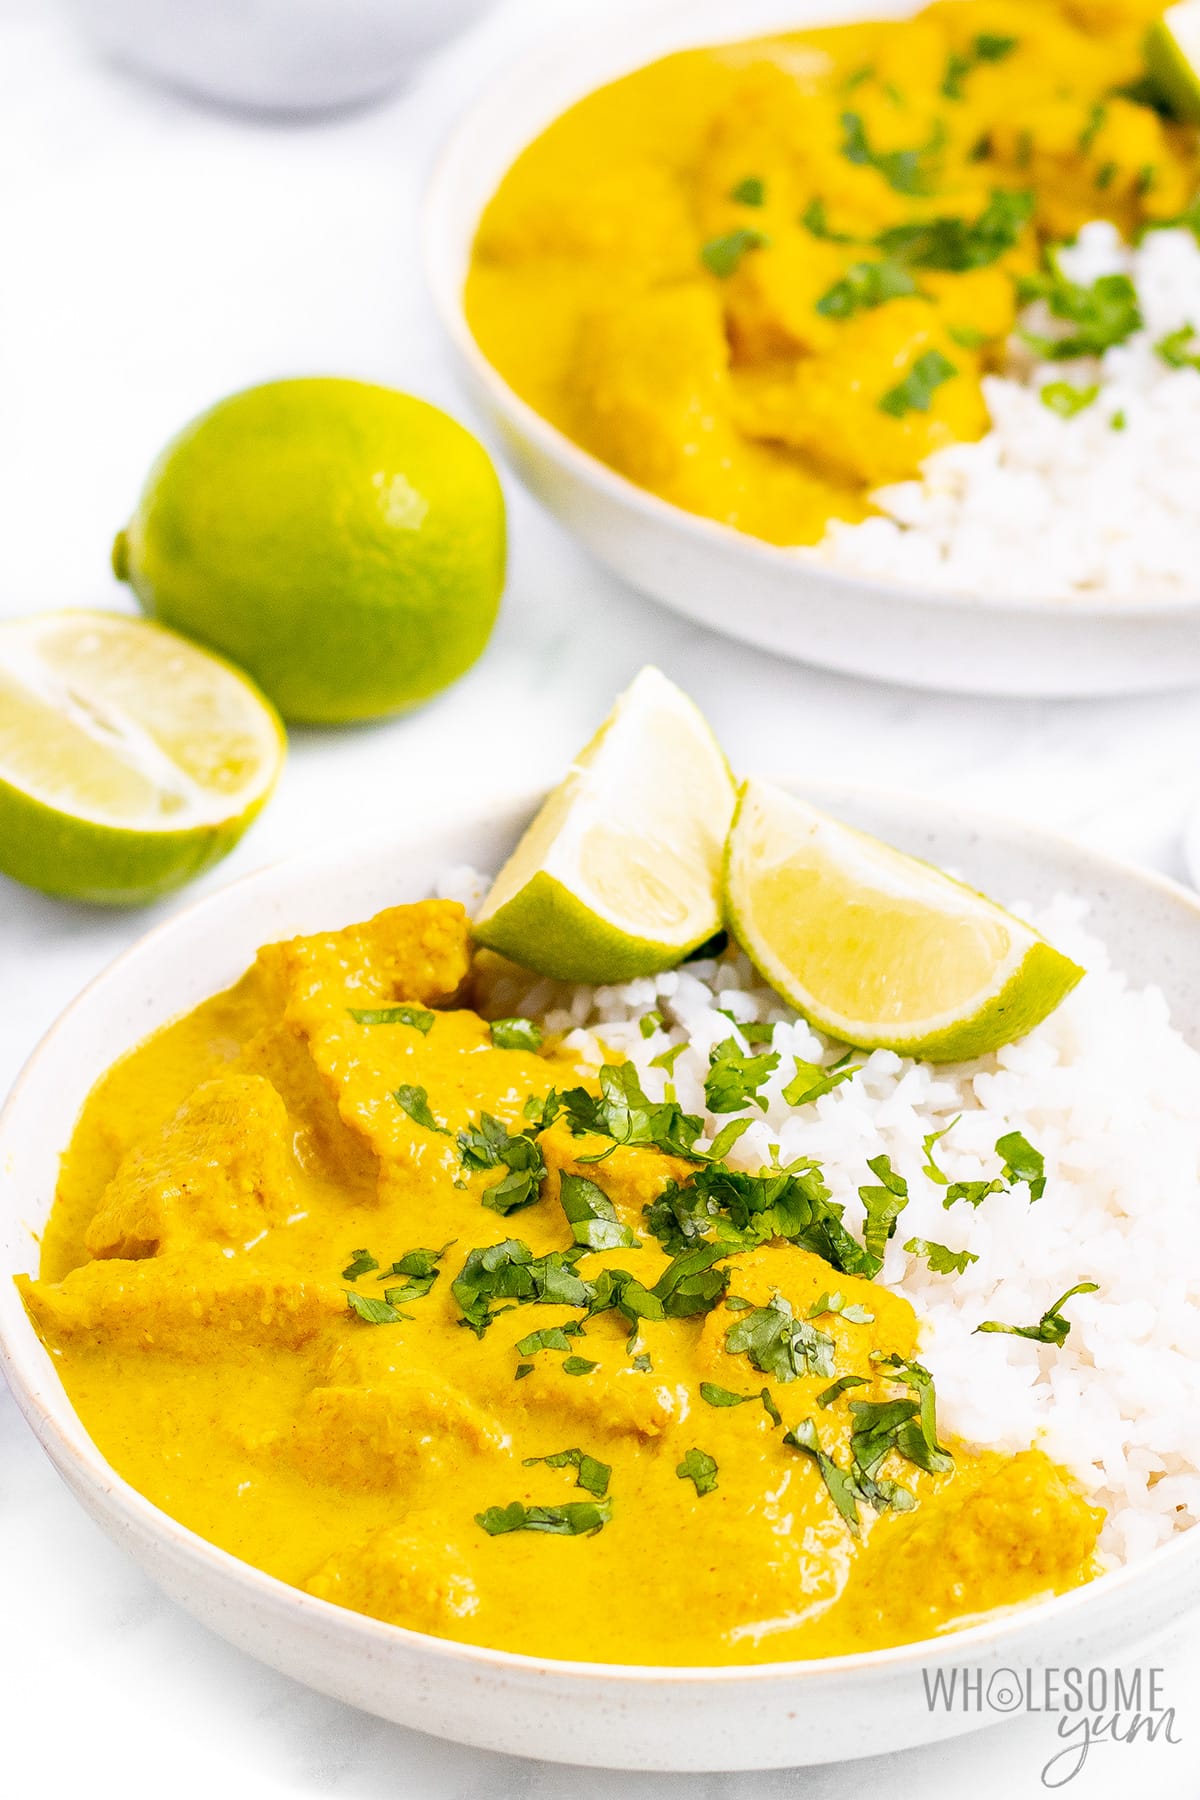 Chicken korma in bowls with limes and rice.